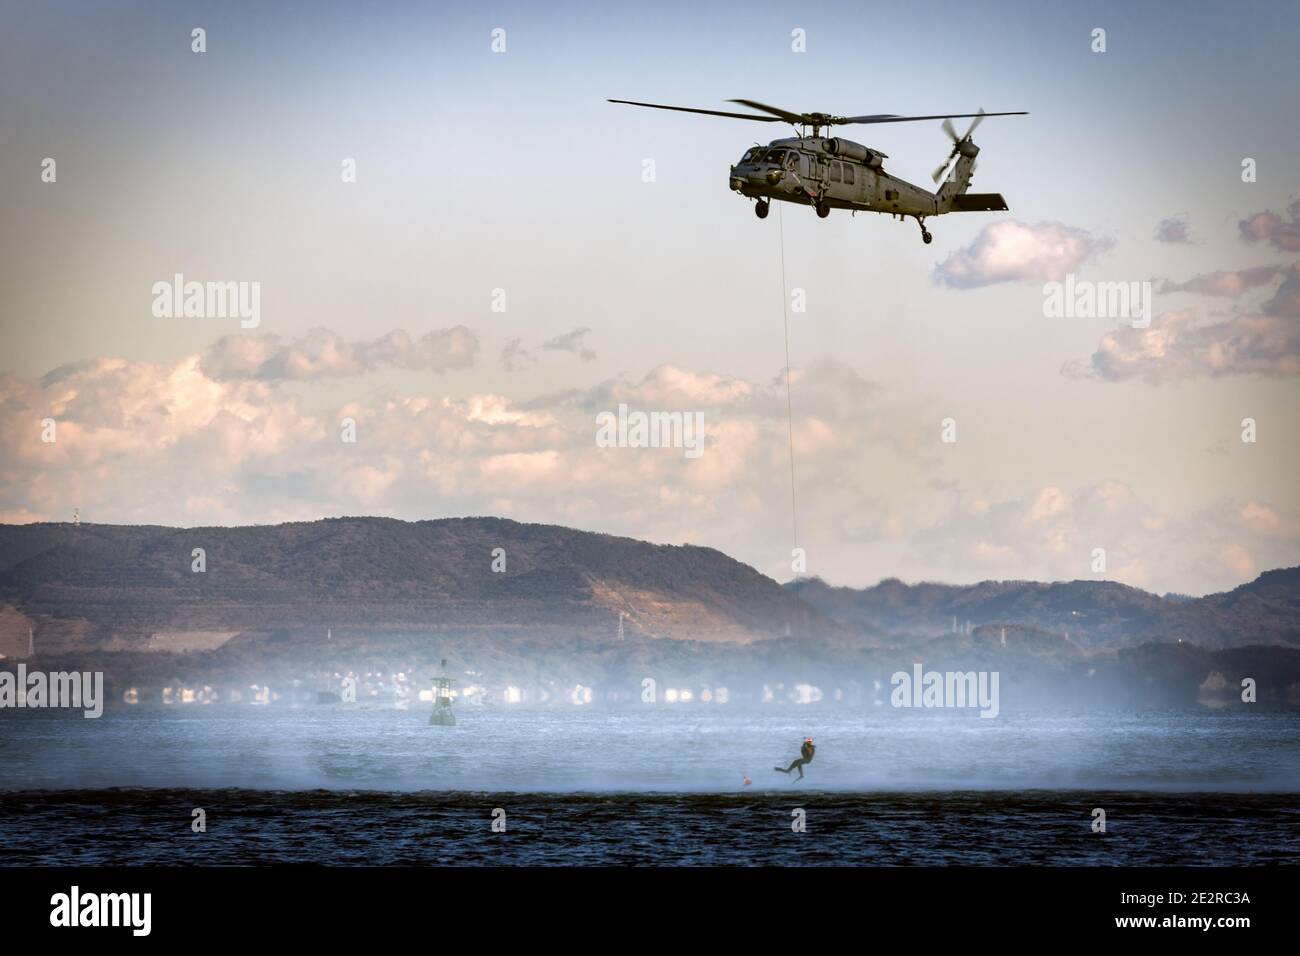 A US Navy MH-60 helicopter hovers while rescue swimmers train in Tokyo Bay. Stock Photo